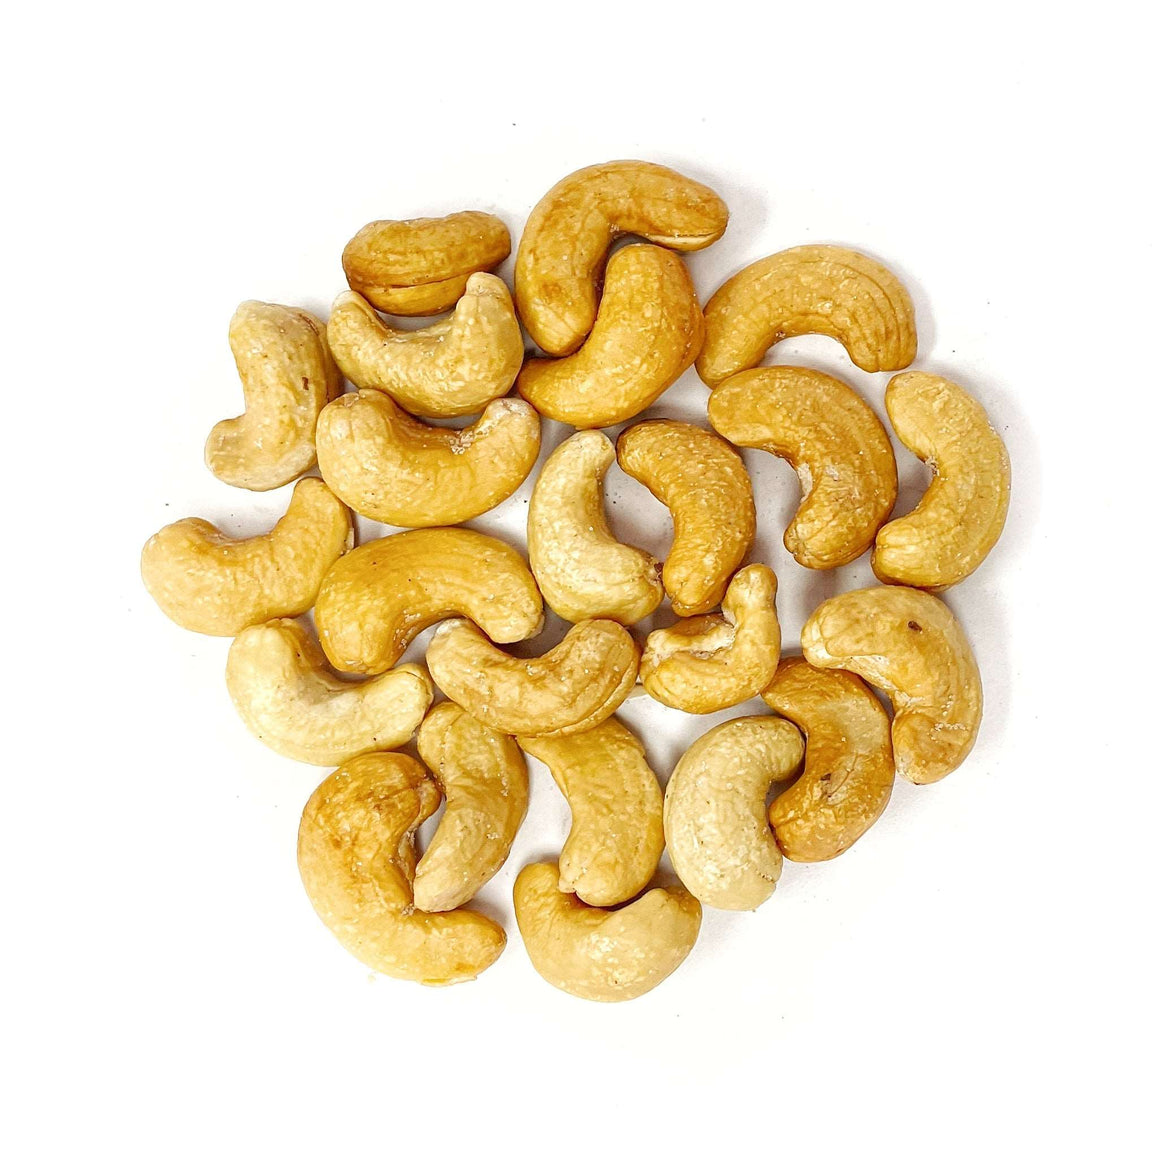 Roasted unSalted Cashews Nuts